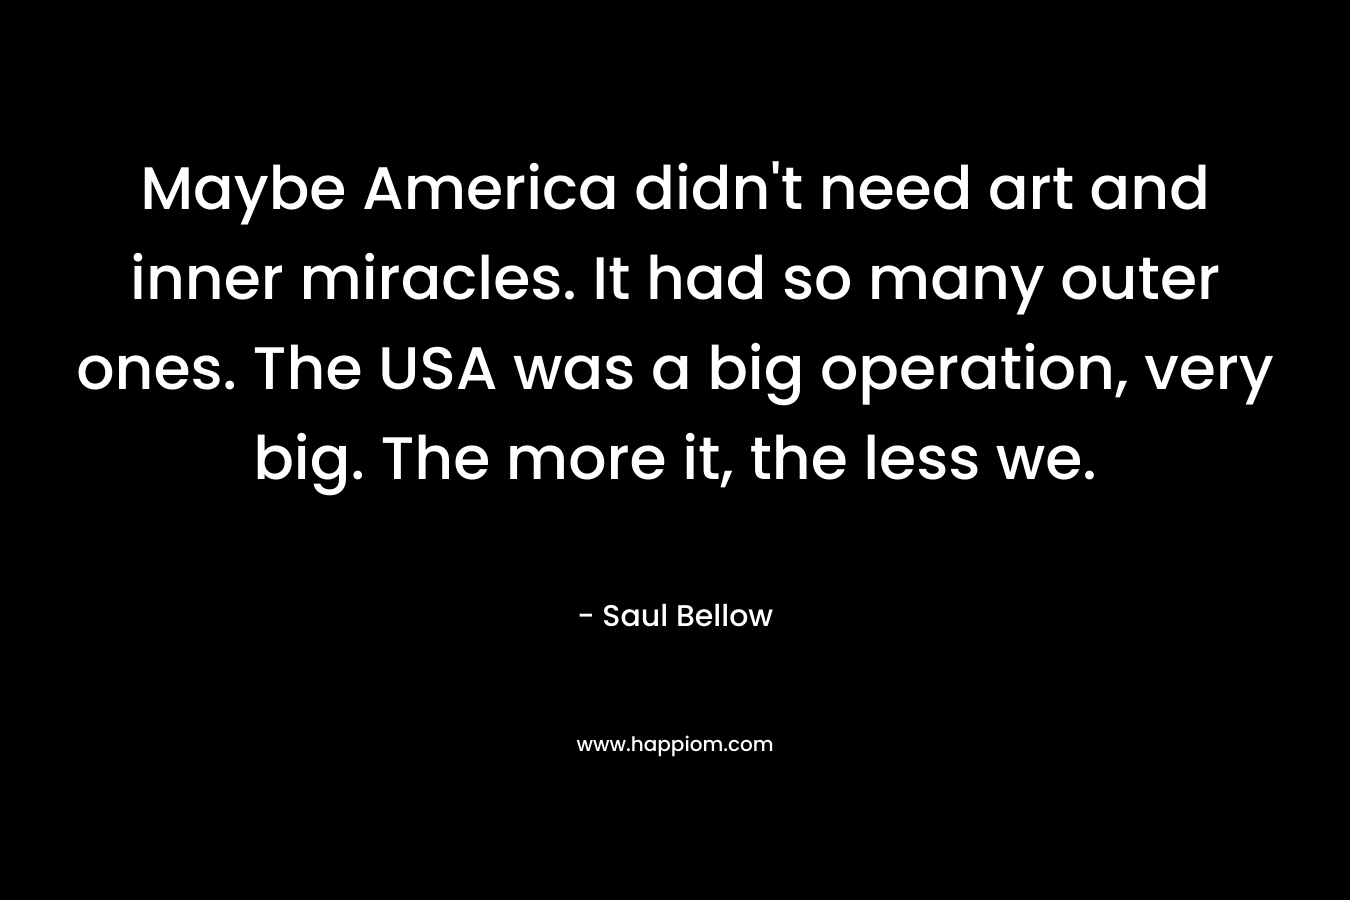 Maybe America didn’t need art and inner miracles. It had so many outer ones. The USA was a big operation, very big. The more it, the less we. – Saul Bellow